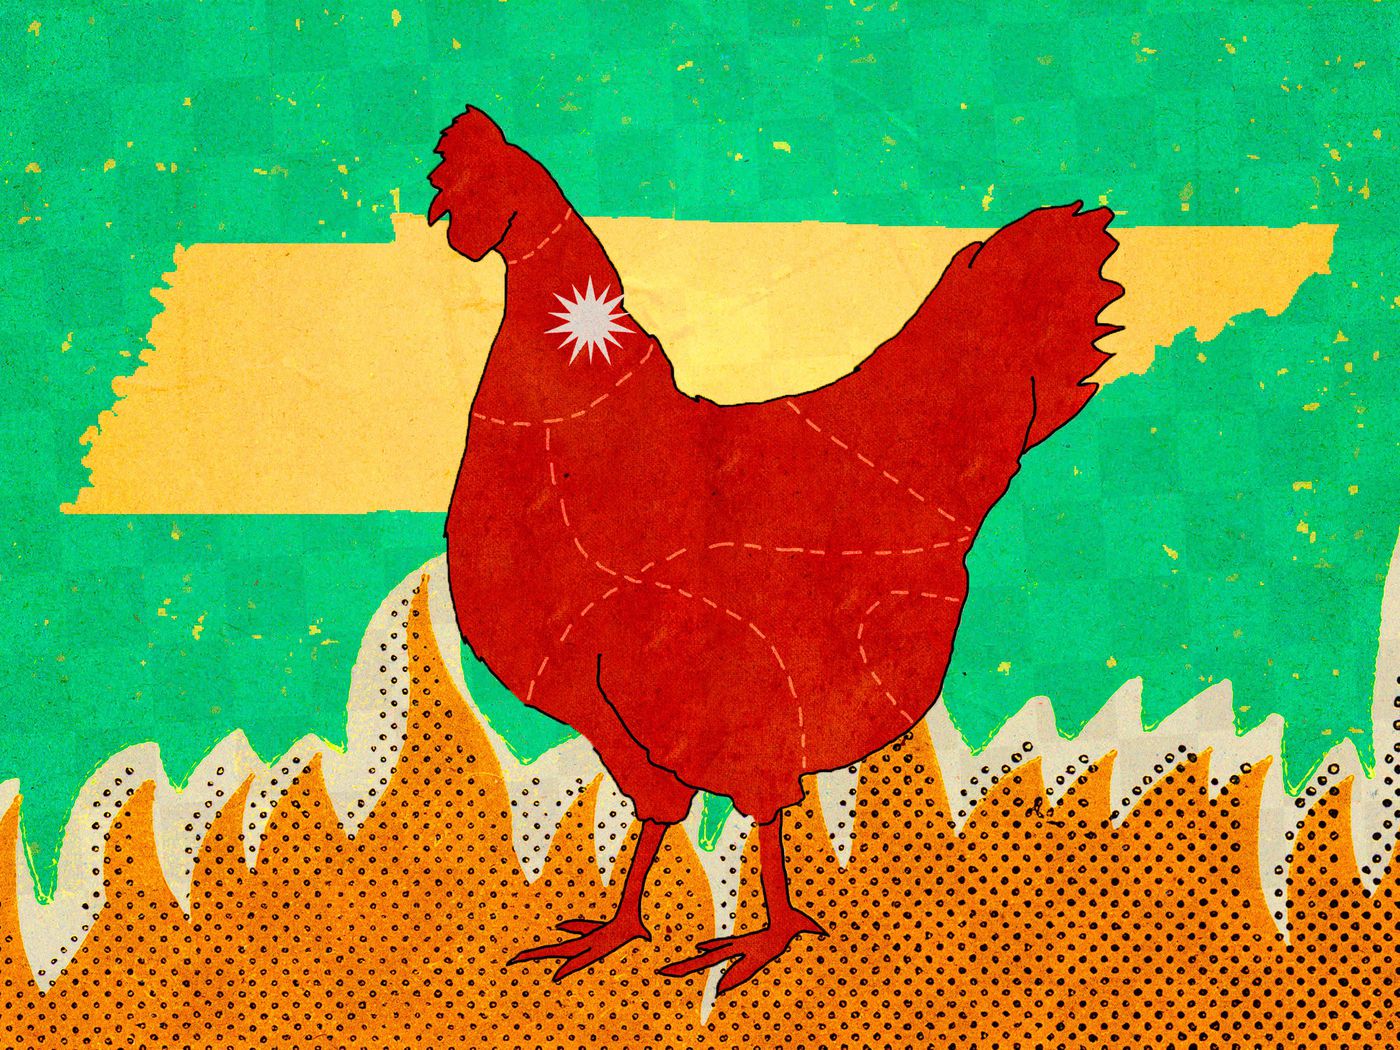 The Burning Desire for Hot Chicken